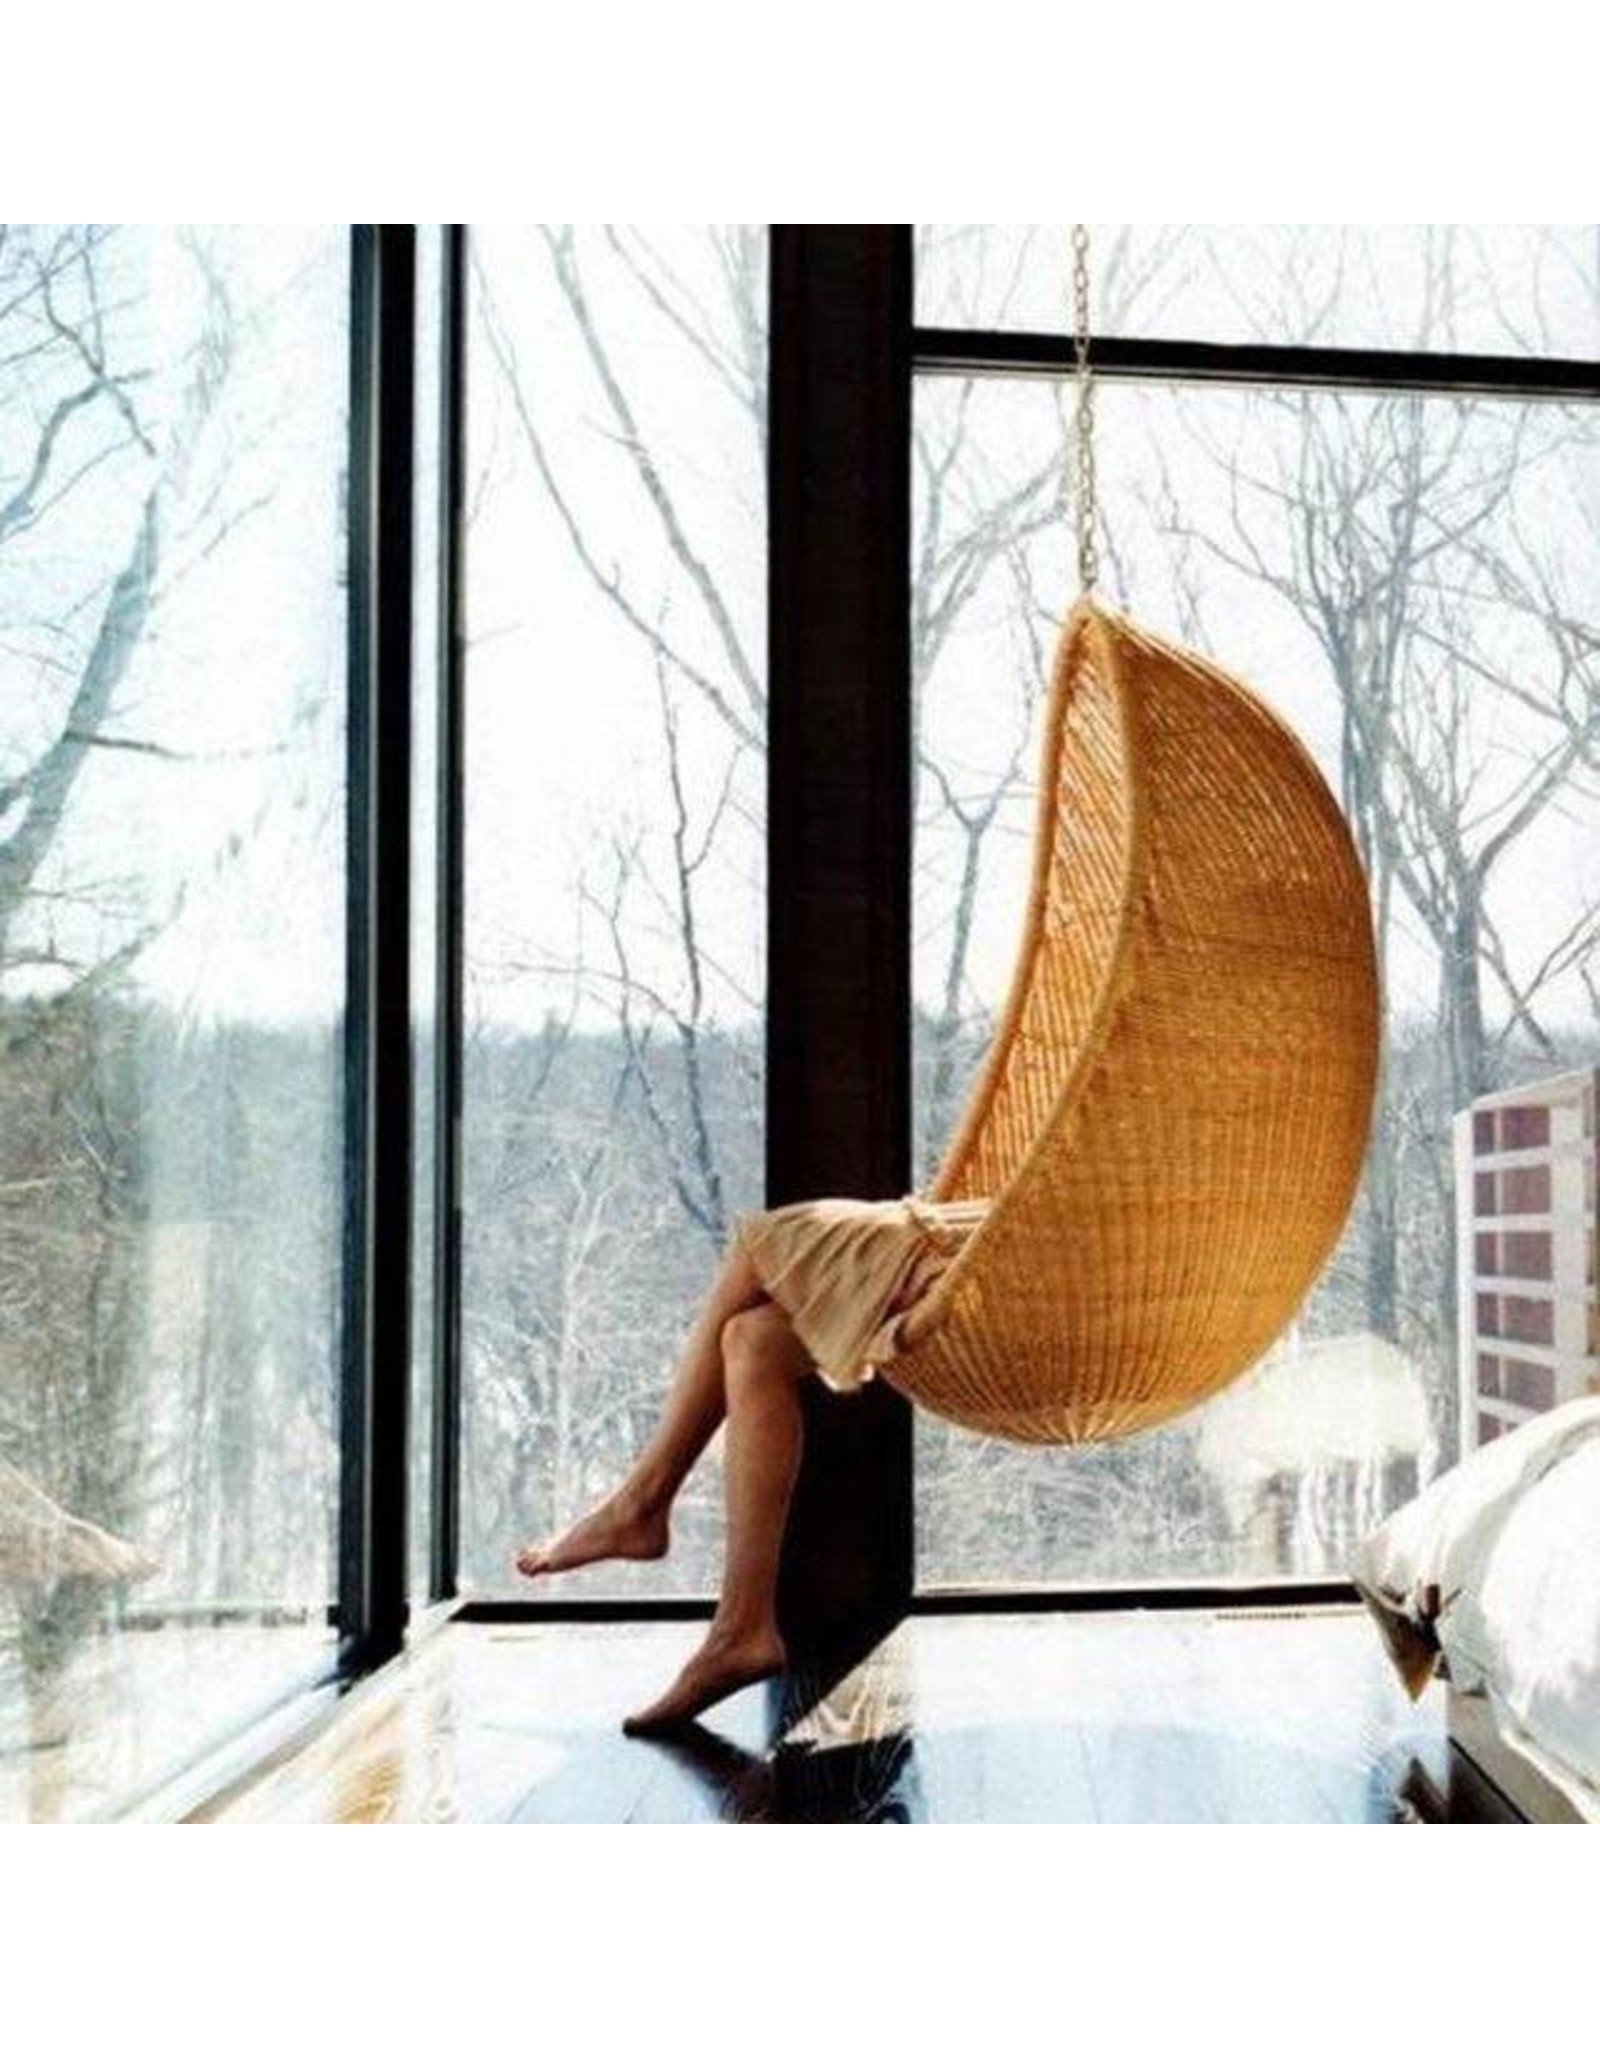 ND-75 HANGING EGG CHAIR